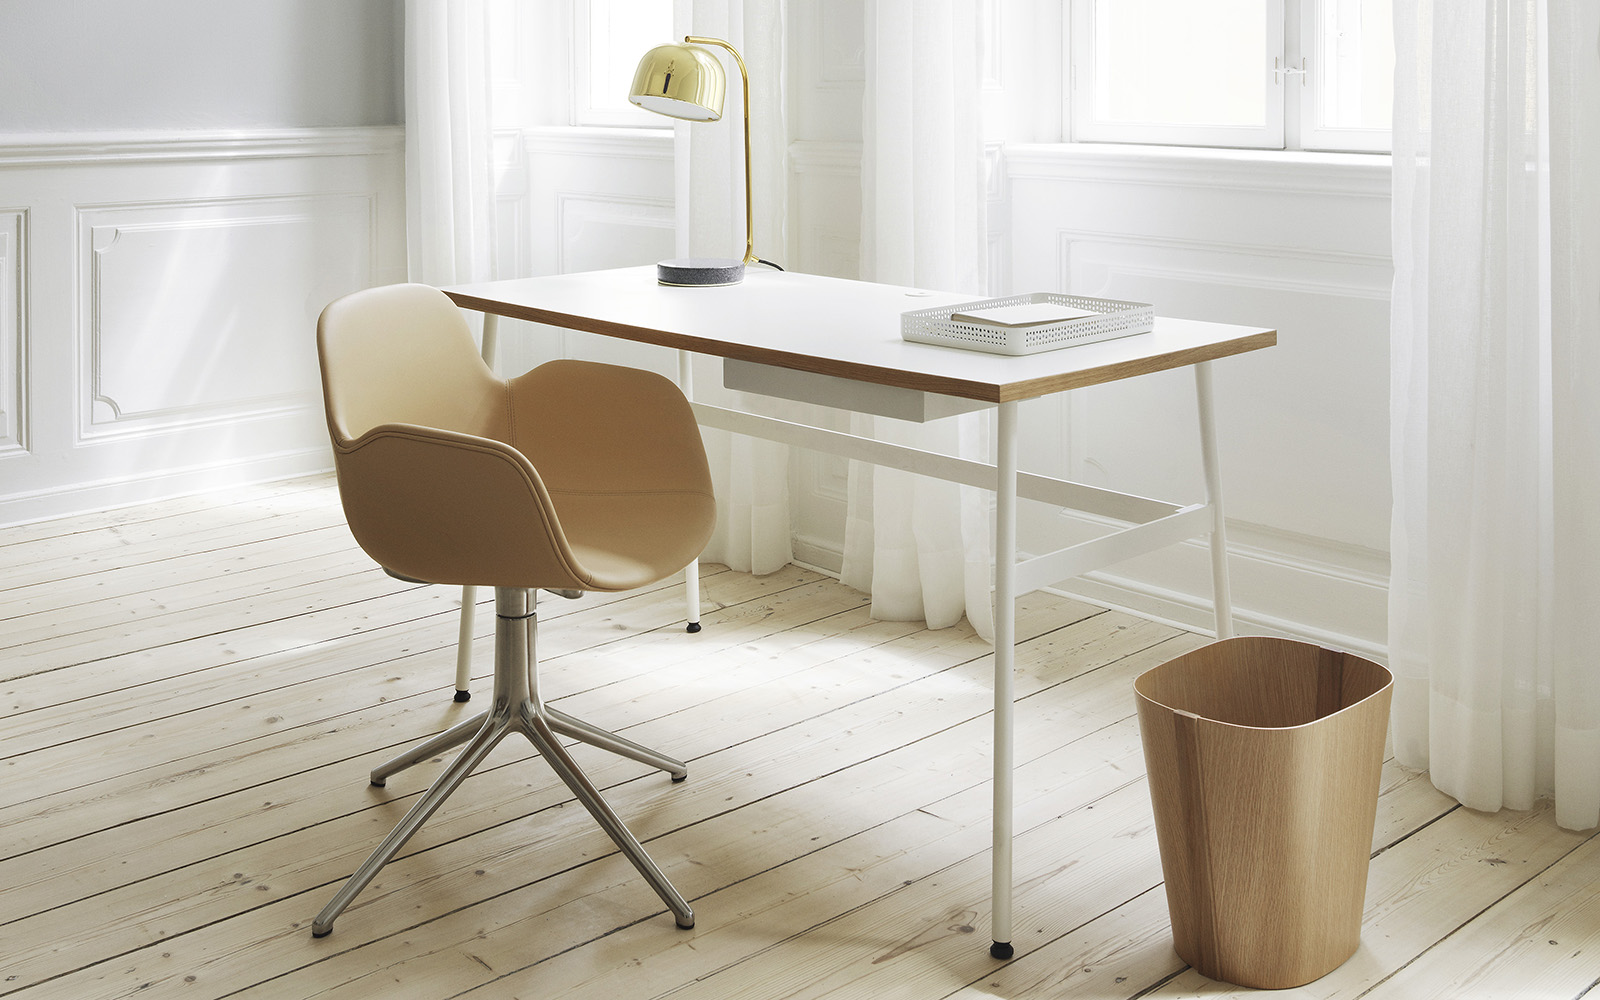 Form Furniture Simplicity and functionality